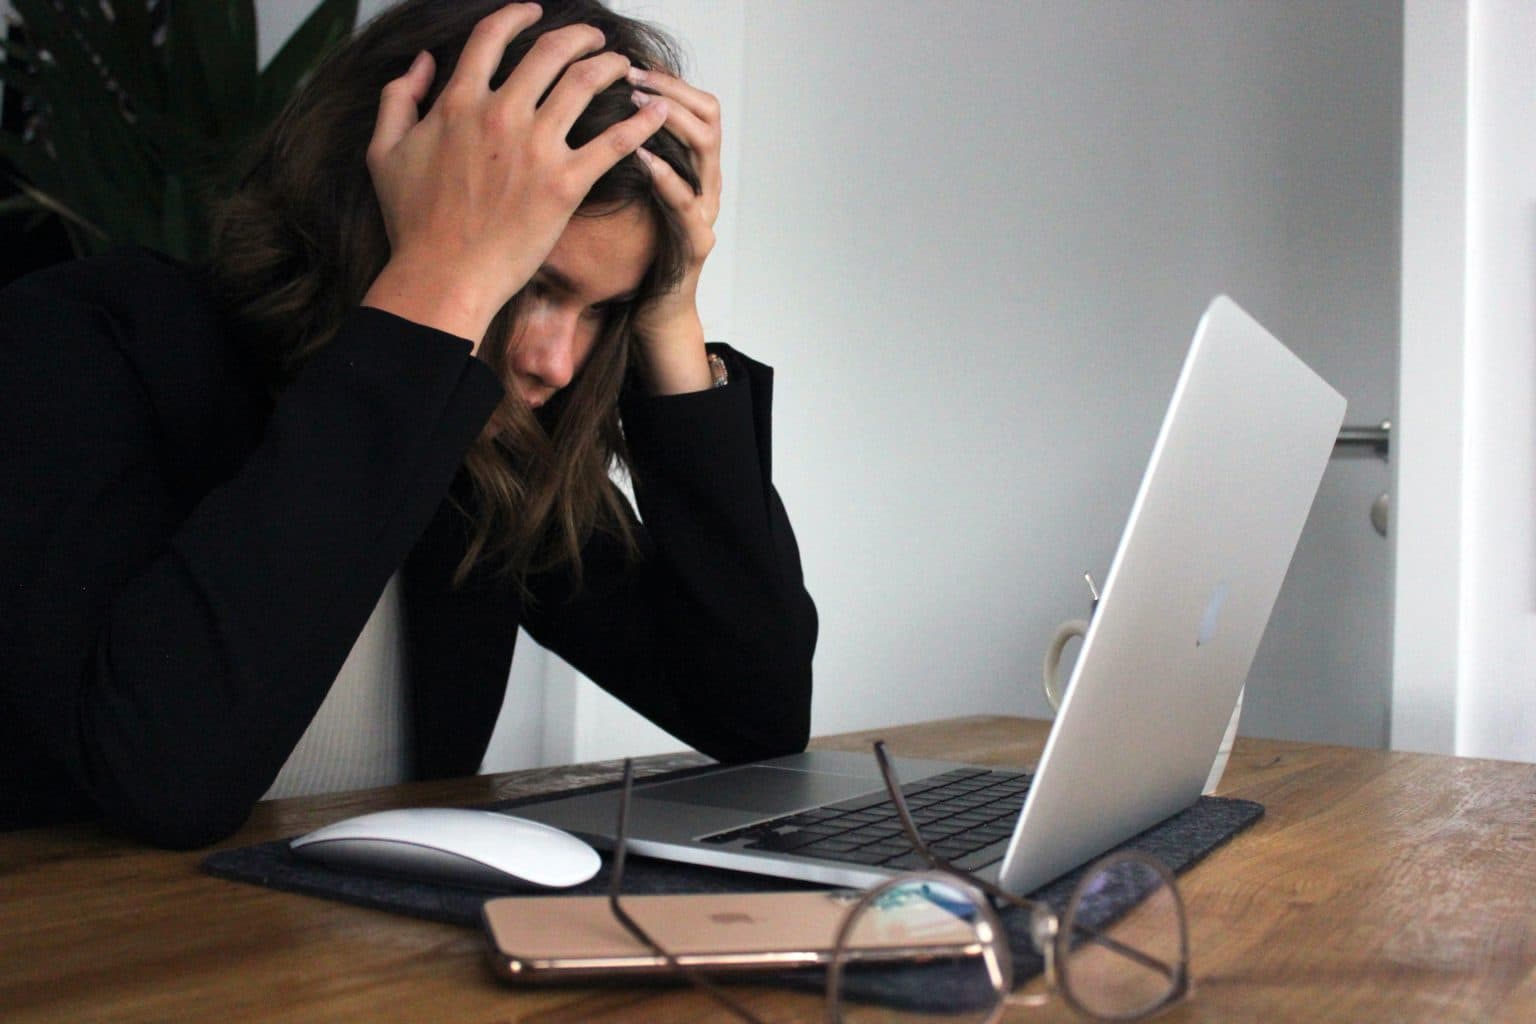 Woman sits in front of laptop with hands on head, stressed about upgrades